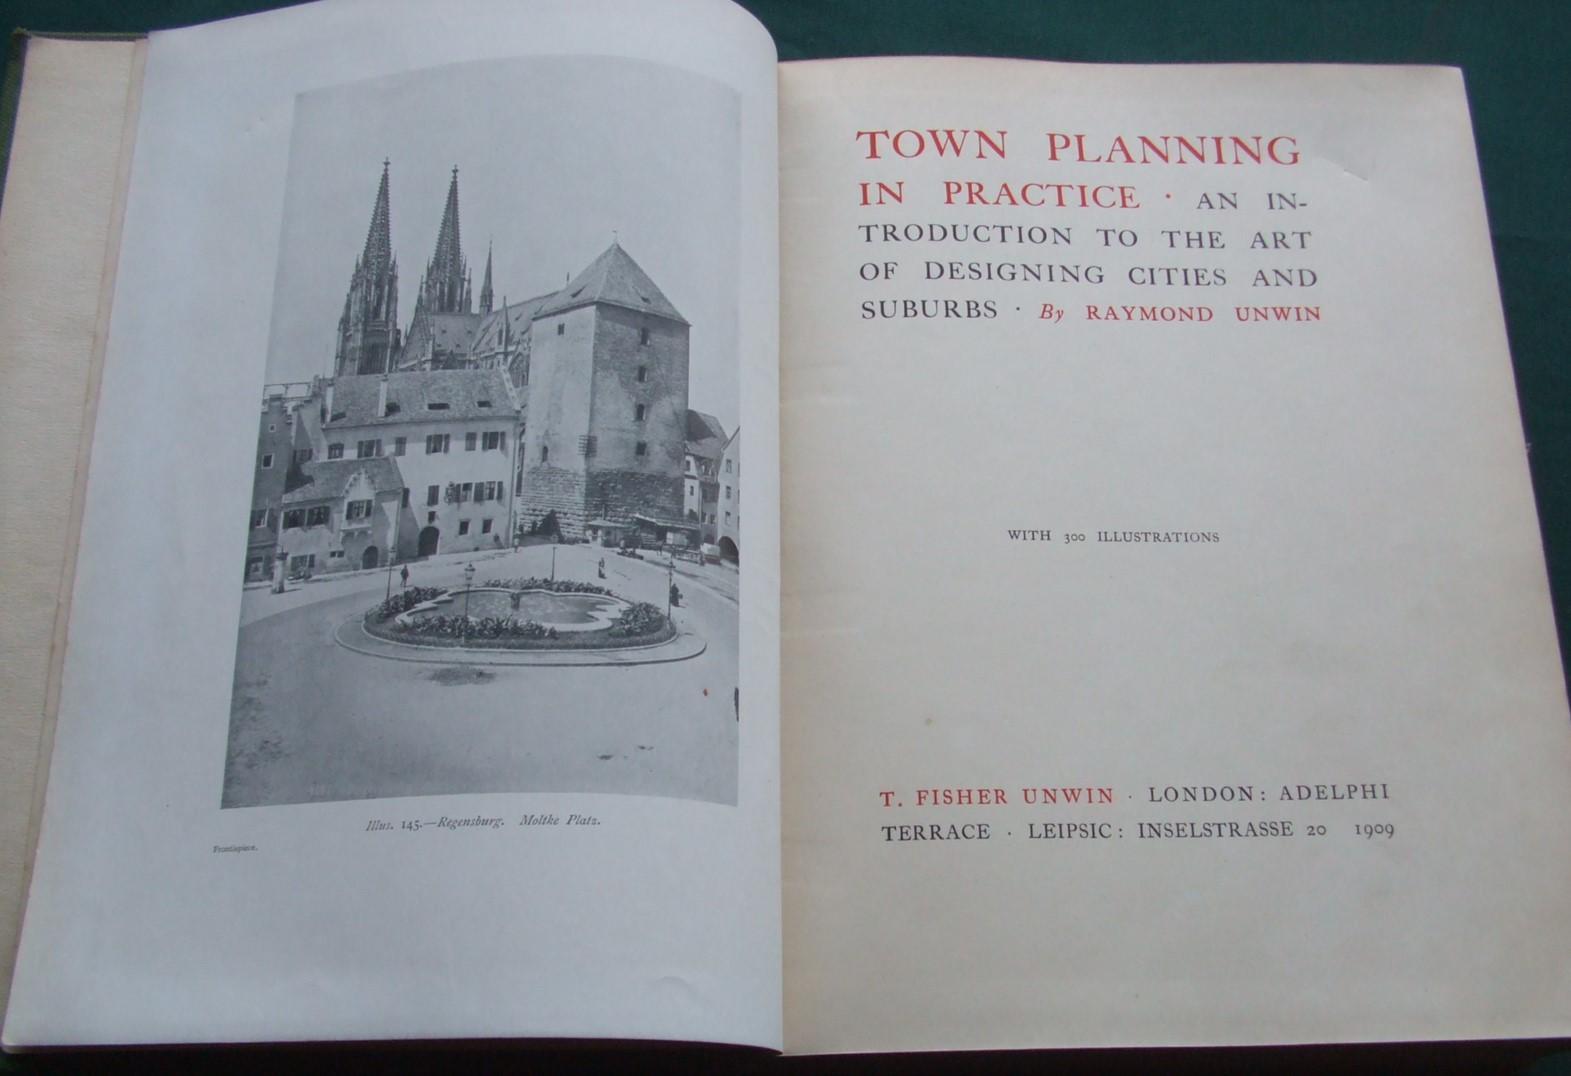 Town Planning in Practice An Introduction to the Art of Designing Cities and Suburbs